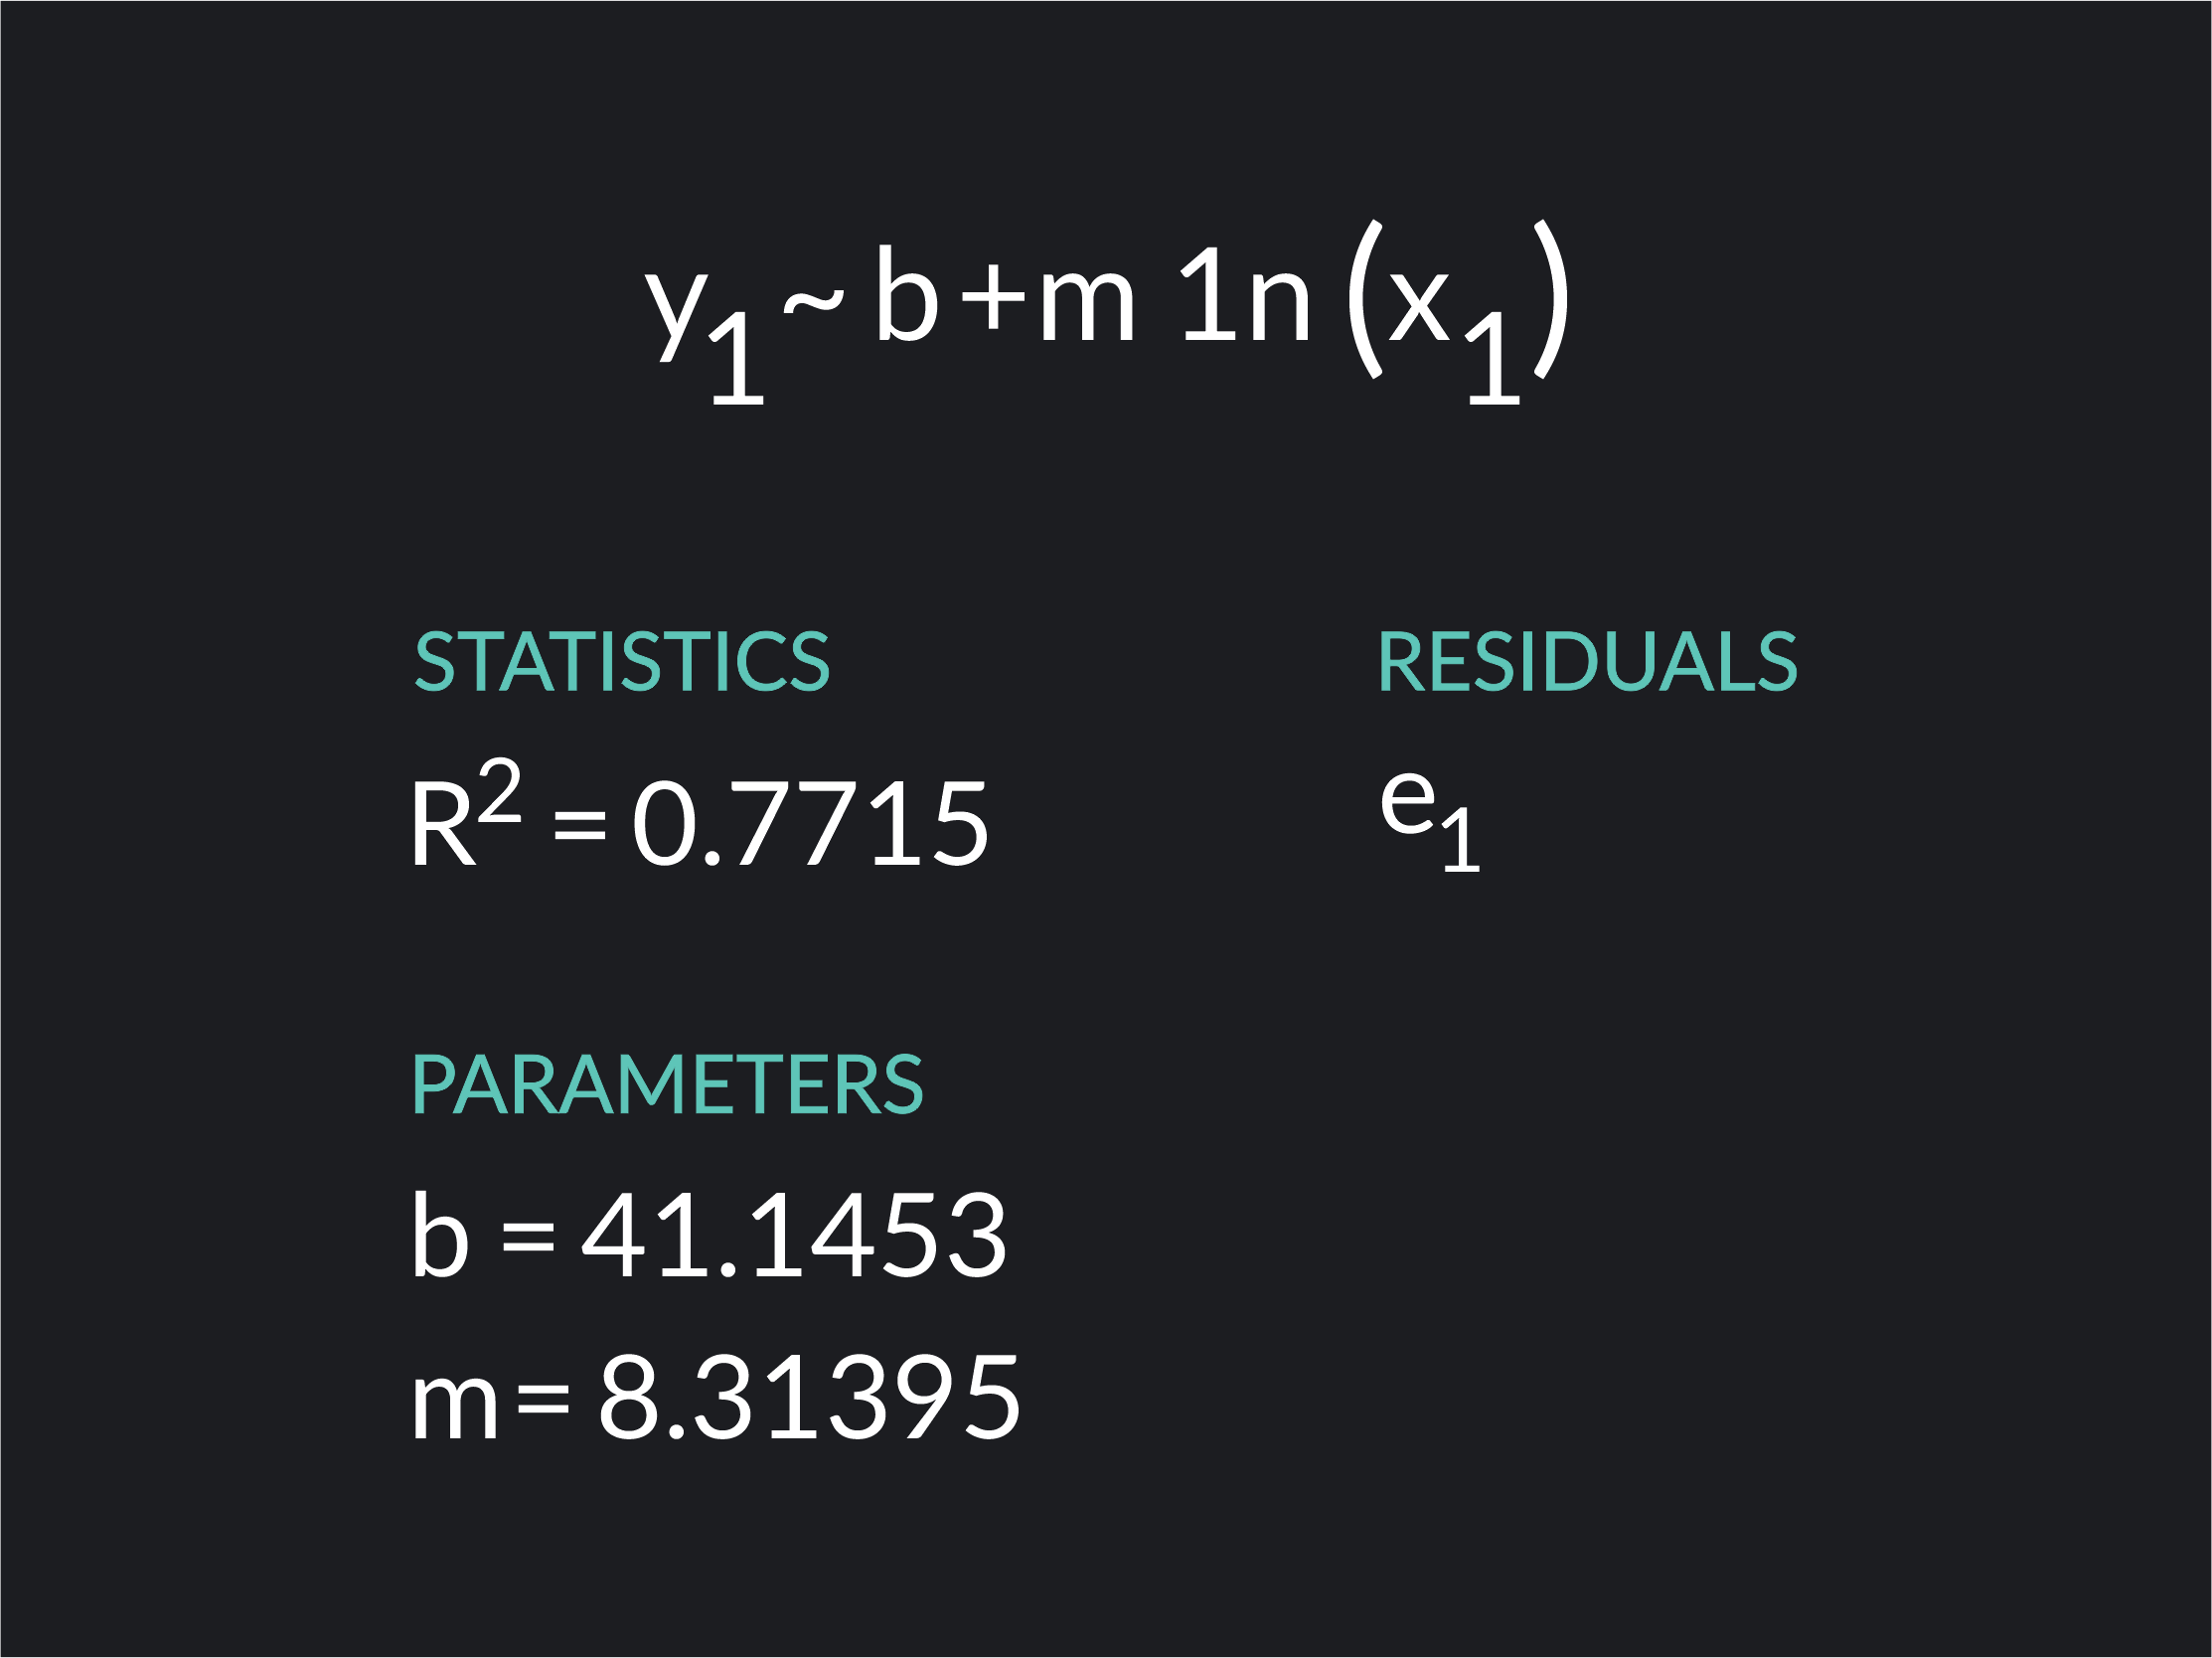 We fit a linear-log function to the data by entering the equation into Demos’ command line